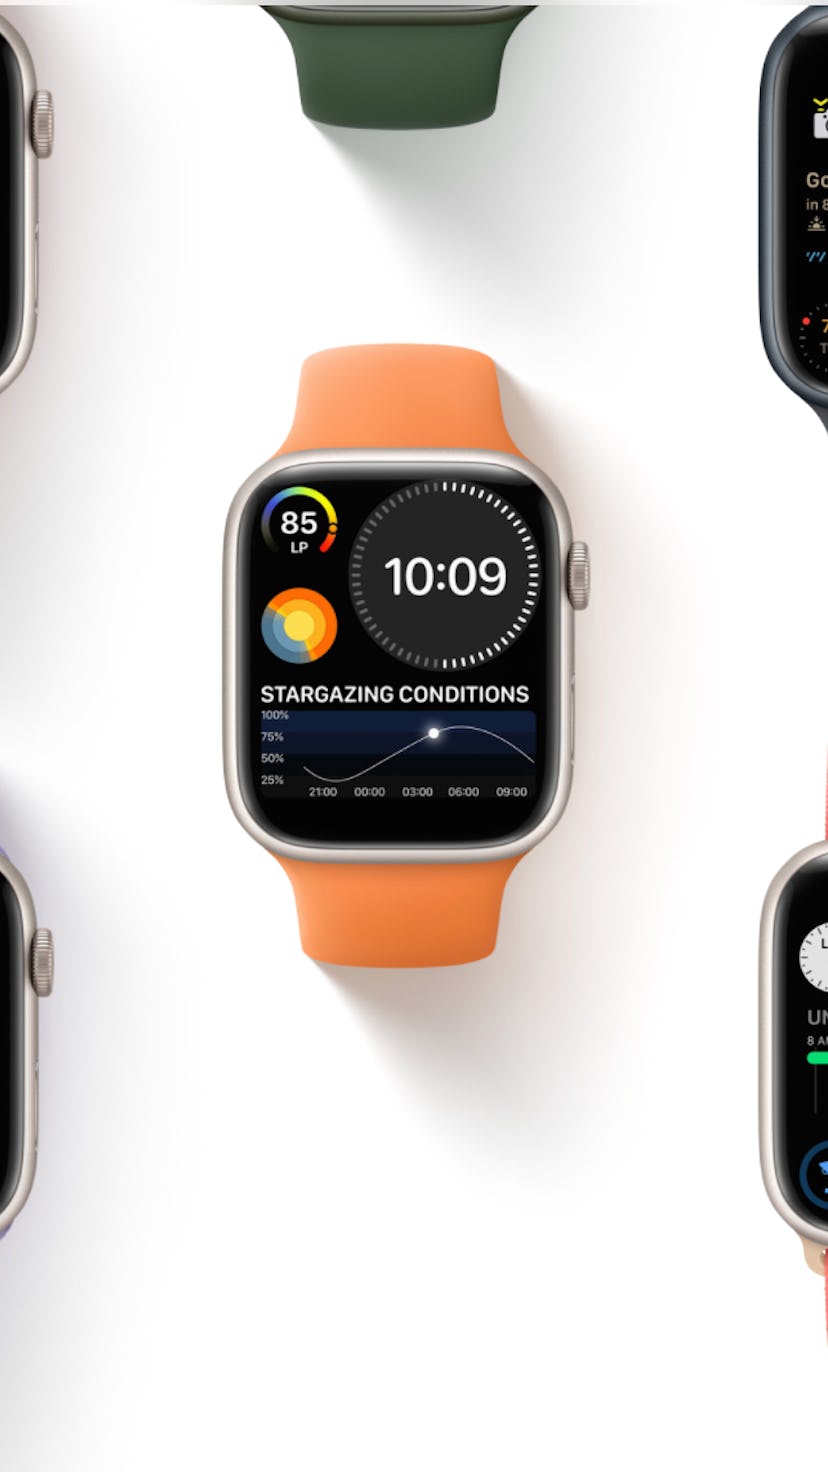 The Apple Watch series 7 has lots of new features.